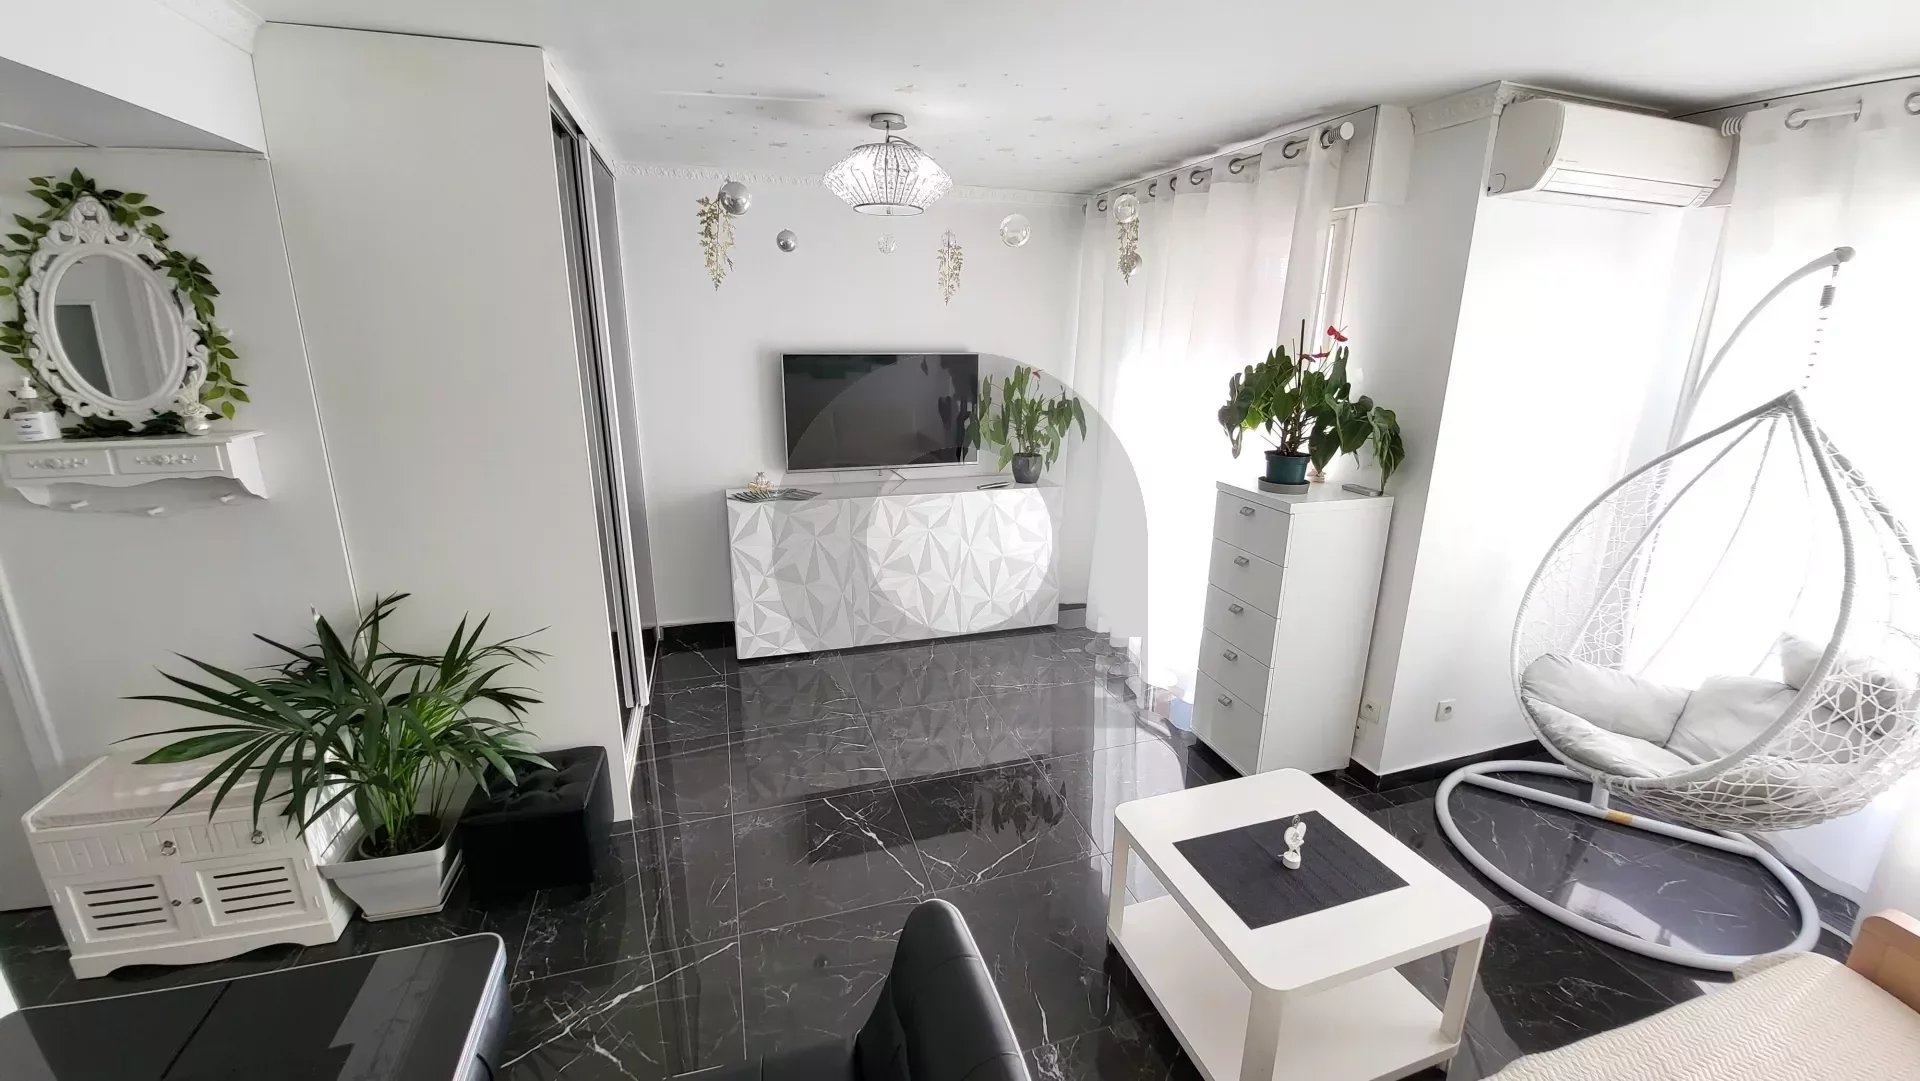 City center - studio - terrace - sunny and quiet - fully renovated